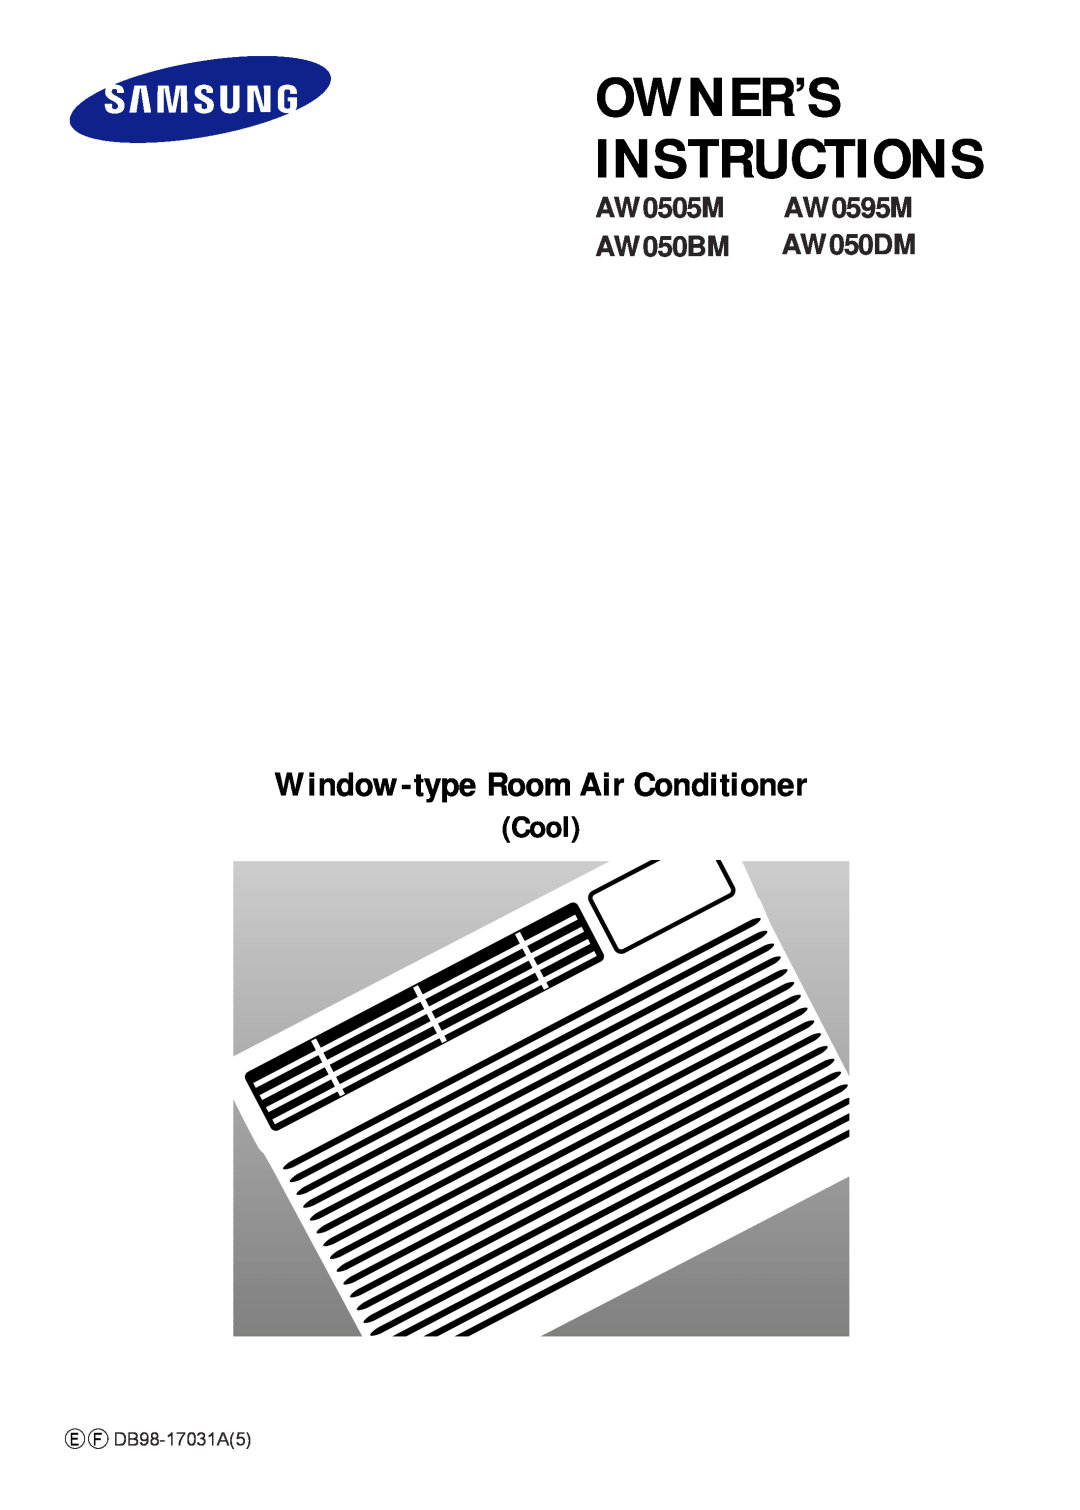 Samsung AW 050DM manual Owner’S Instructions, Window-typeRoom Air Conditioner, AW0505M AW0595M AW050BM AW050DM, Cool 